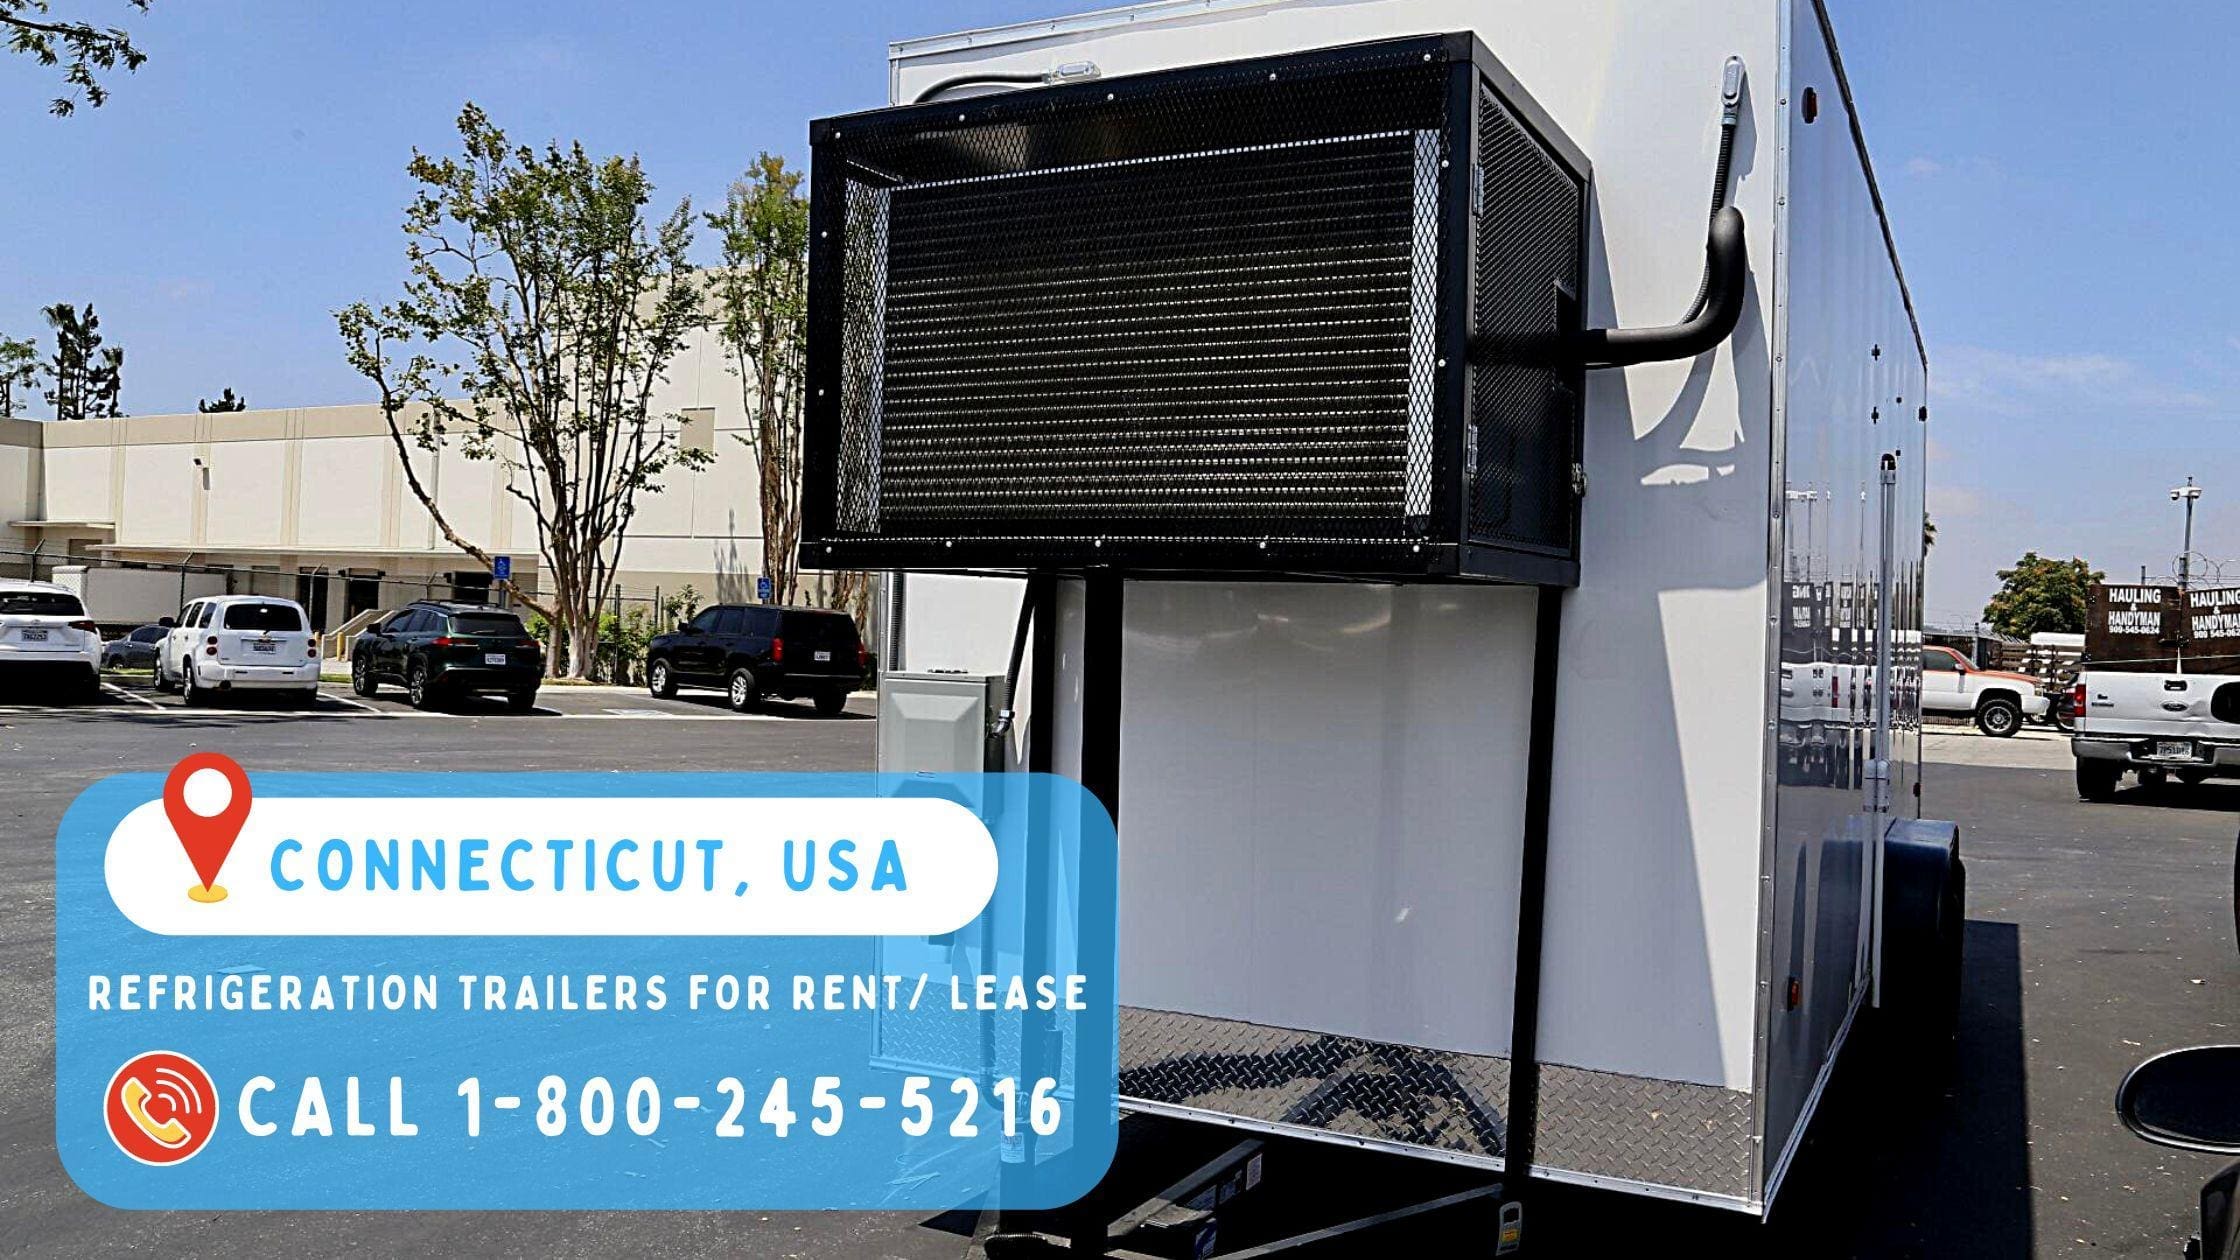 Refrigeration Trailers for Rent/ Lease in Connecticut